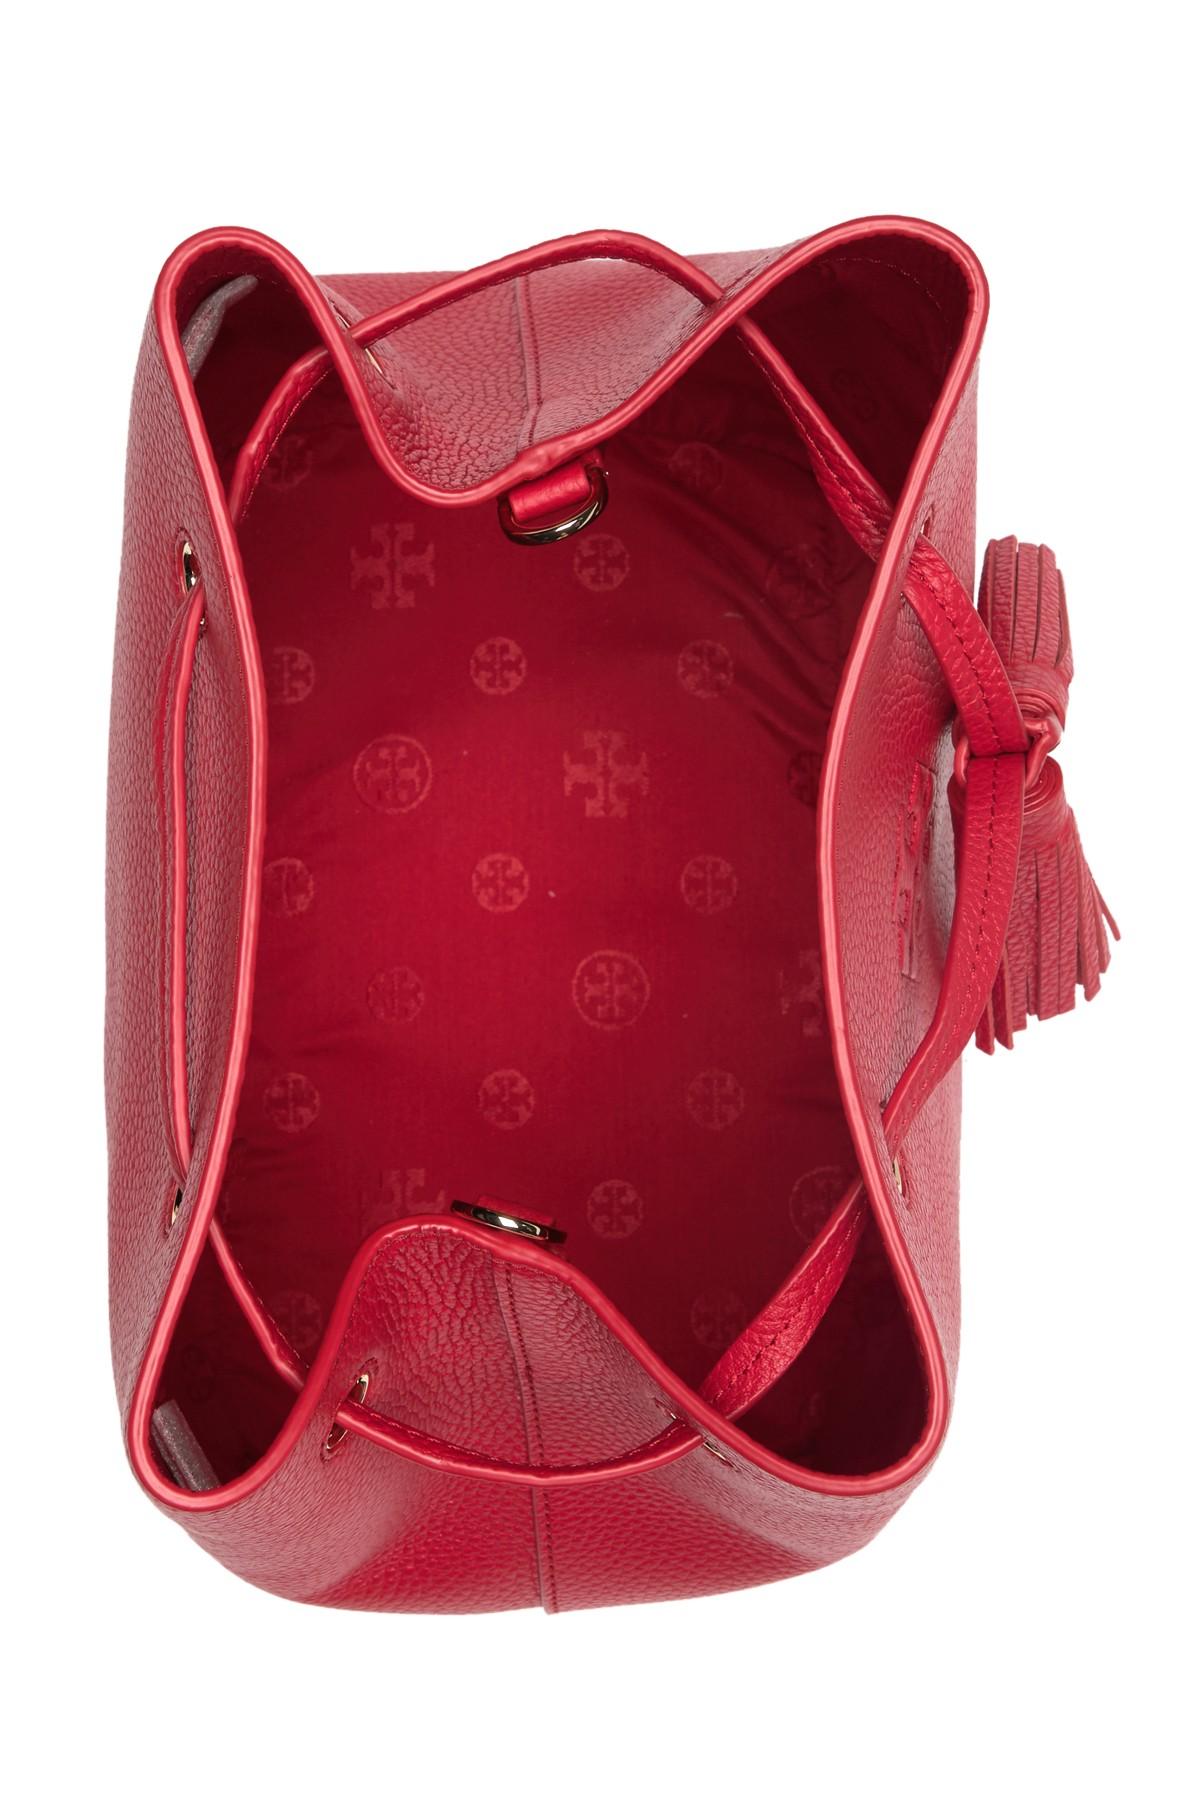 Tory Burch Bucket Bag Thea Red Leather Tote - MyDesignerly